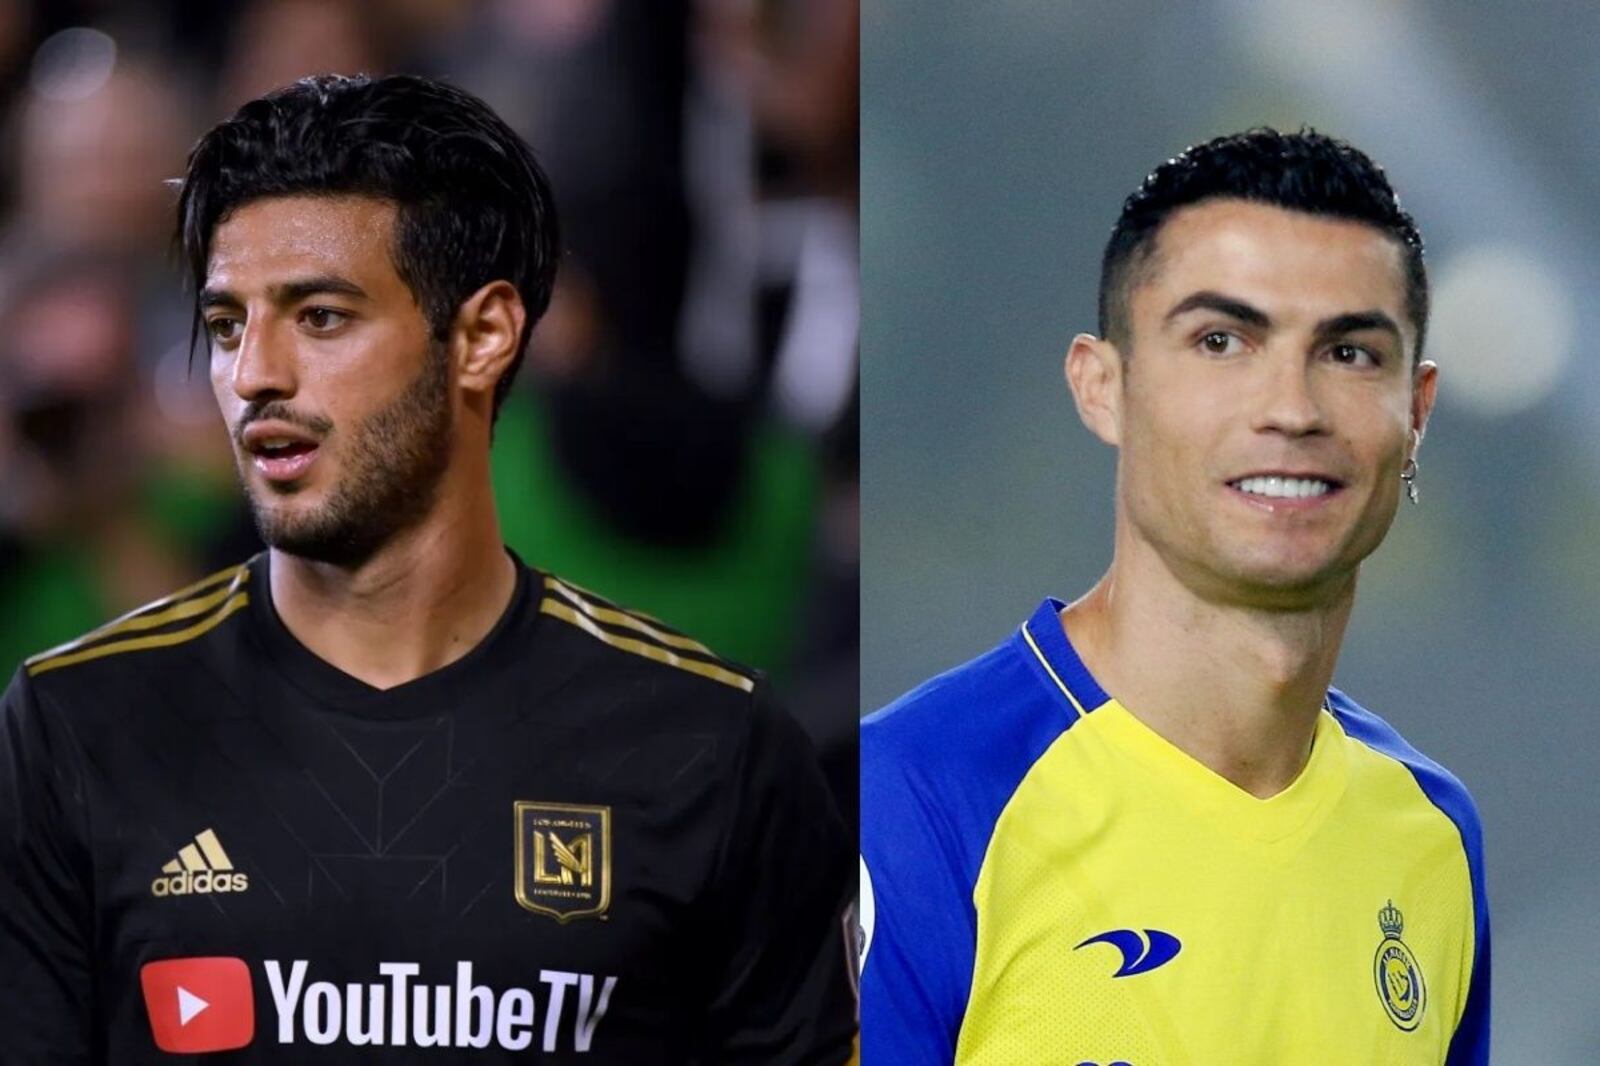 Carlos Vela gives the best news to Cristiano Ronaldo after his crisis in Arabia